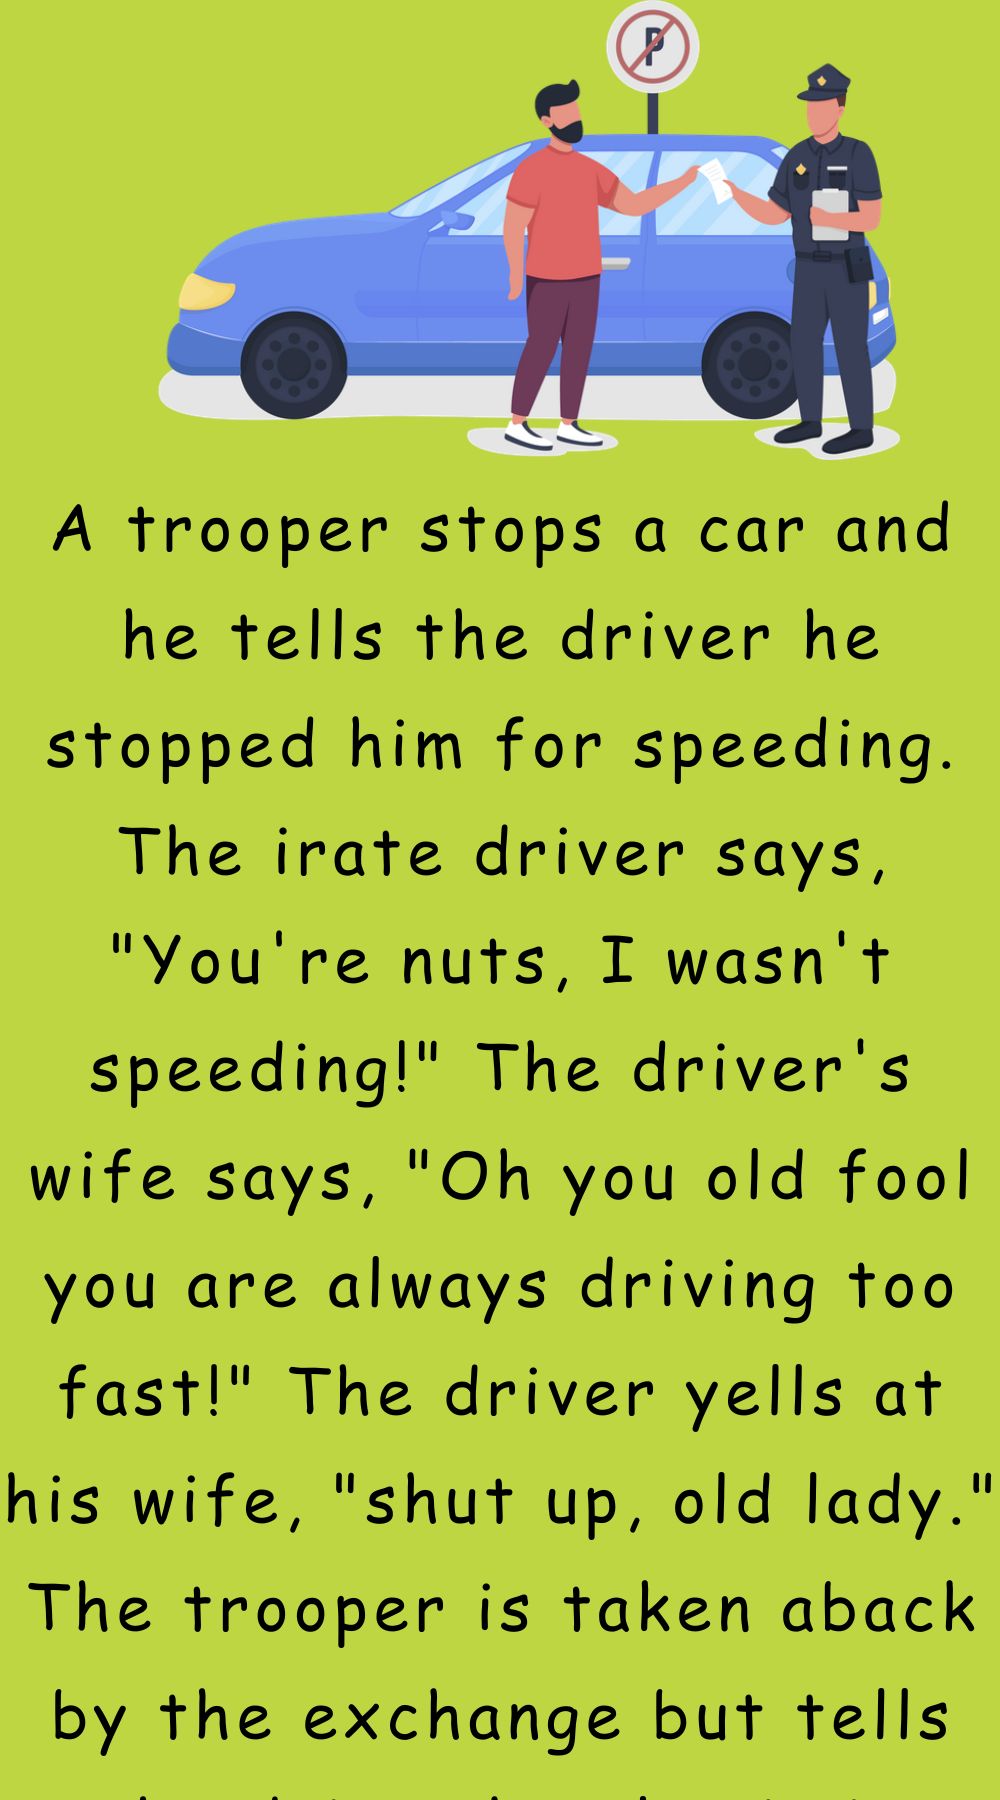 A trooper stops a car and he tells 